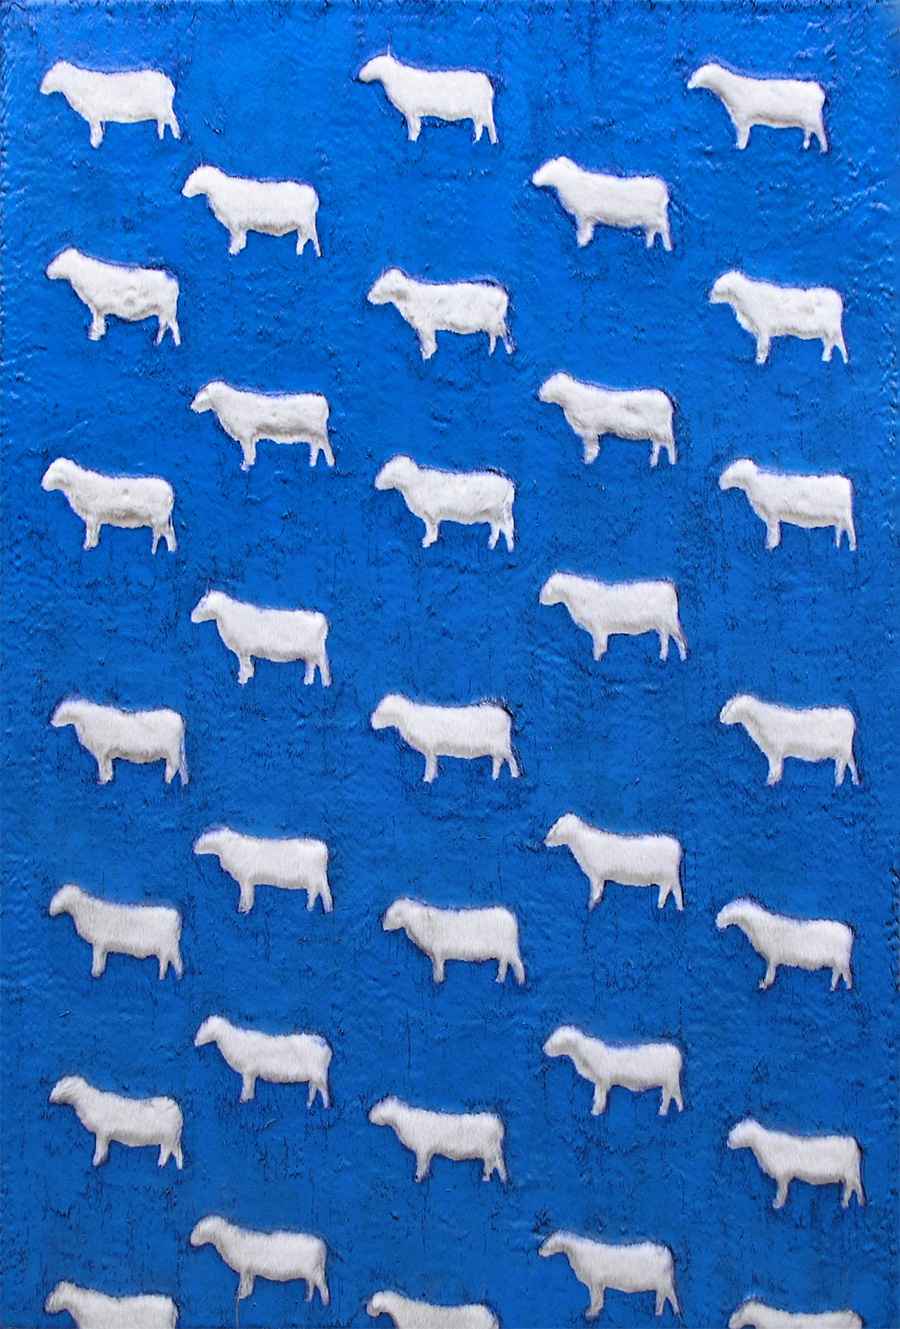 Counting Sheep, a painting by Guido Vrolix